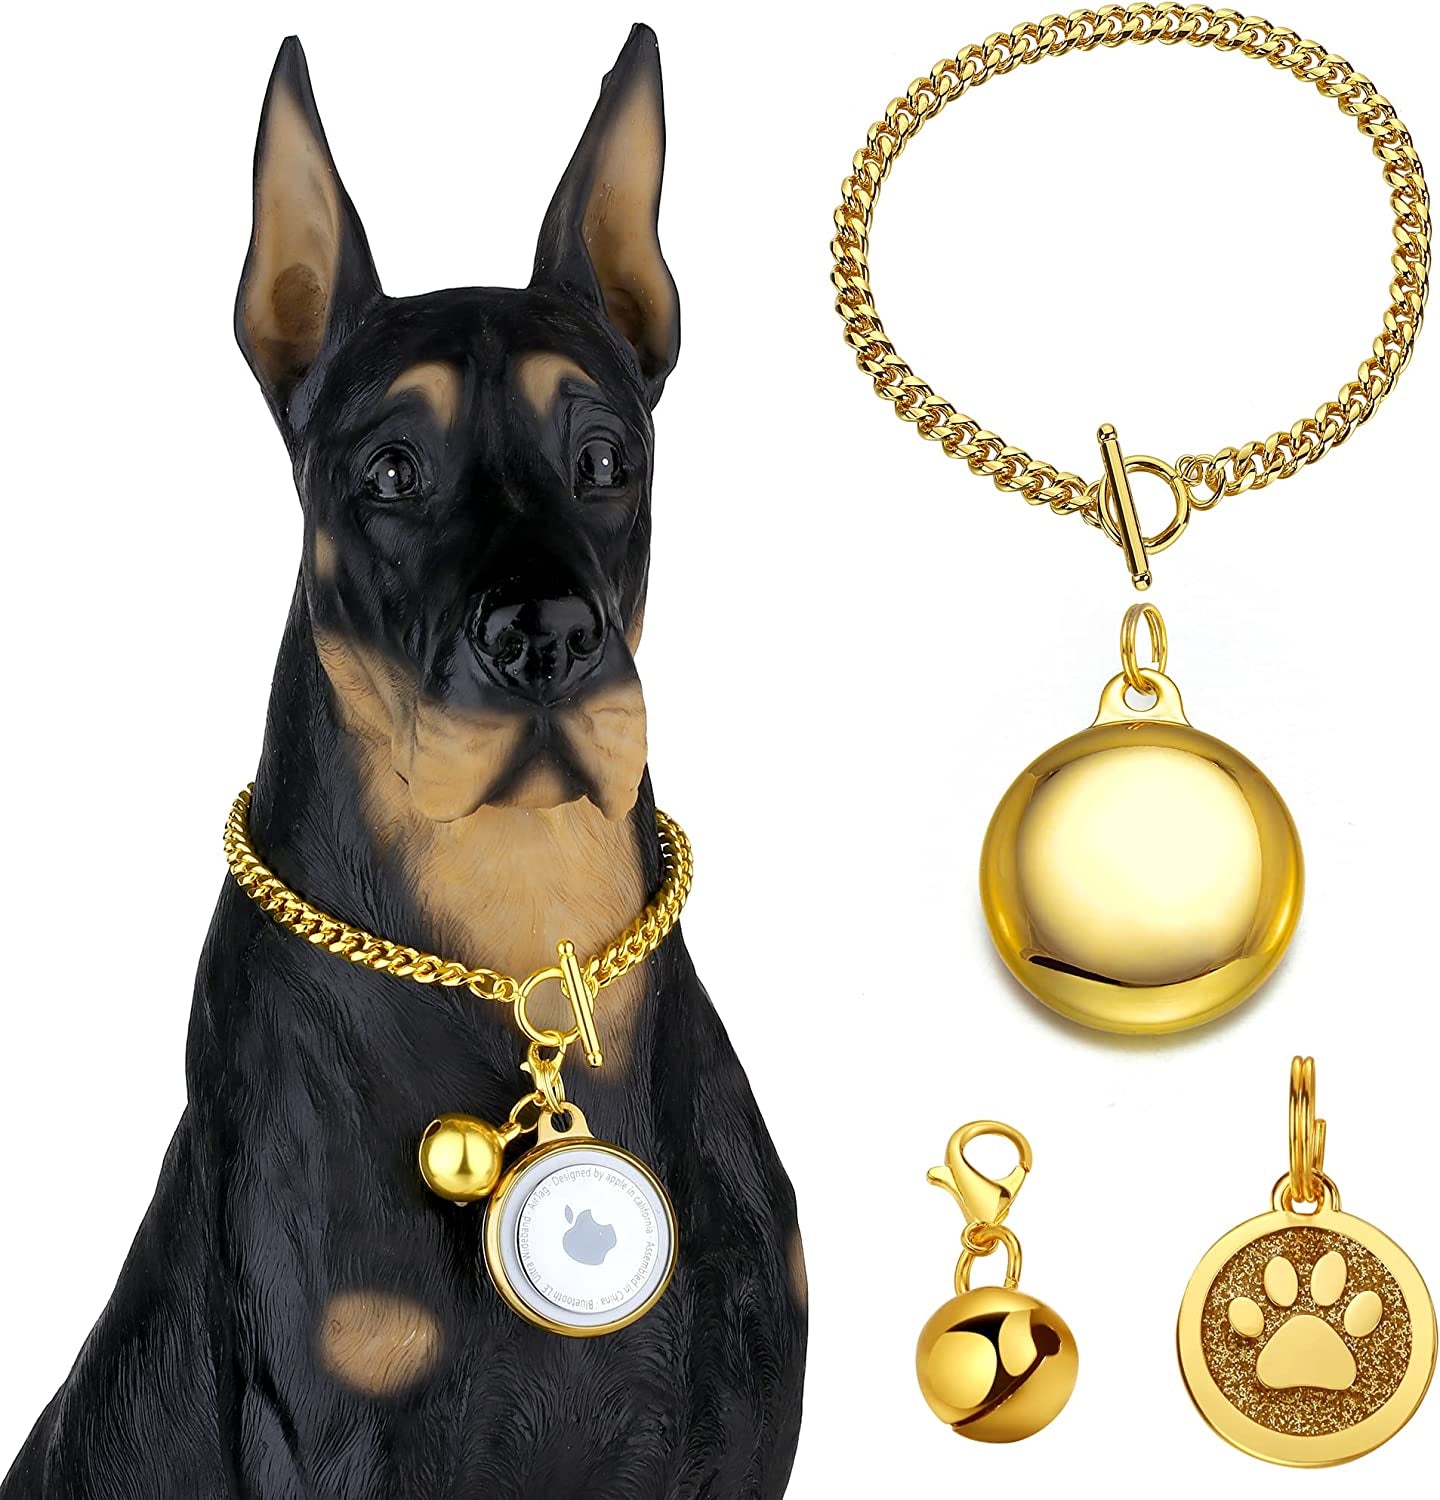 Dog Gold Chain Collar and Leash Set Luxury Link Heavy Duty Stainless Steel/